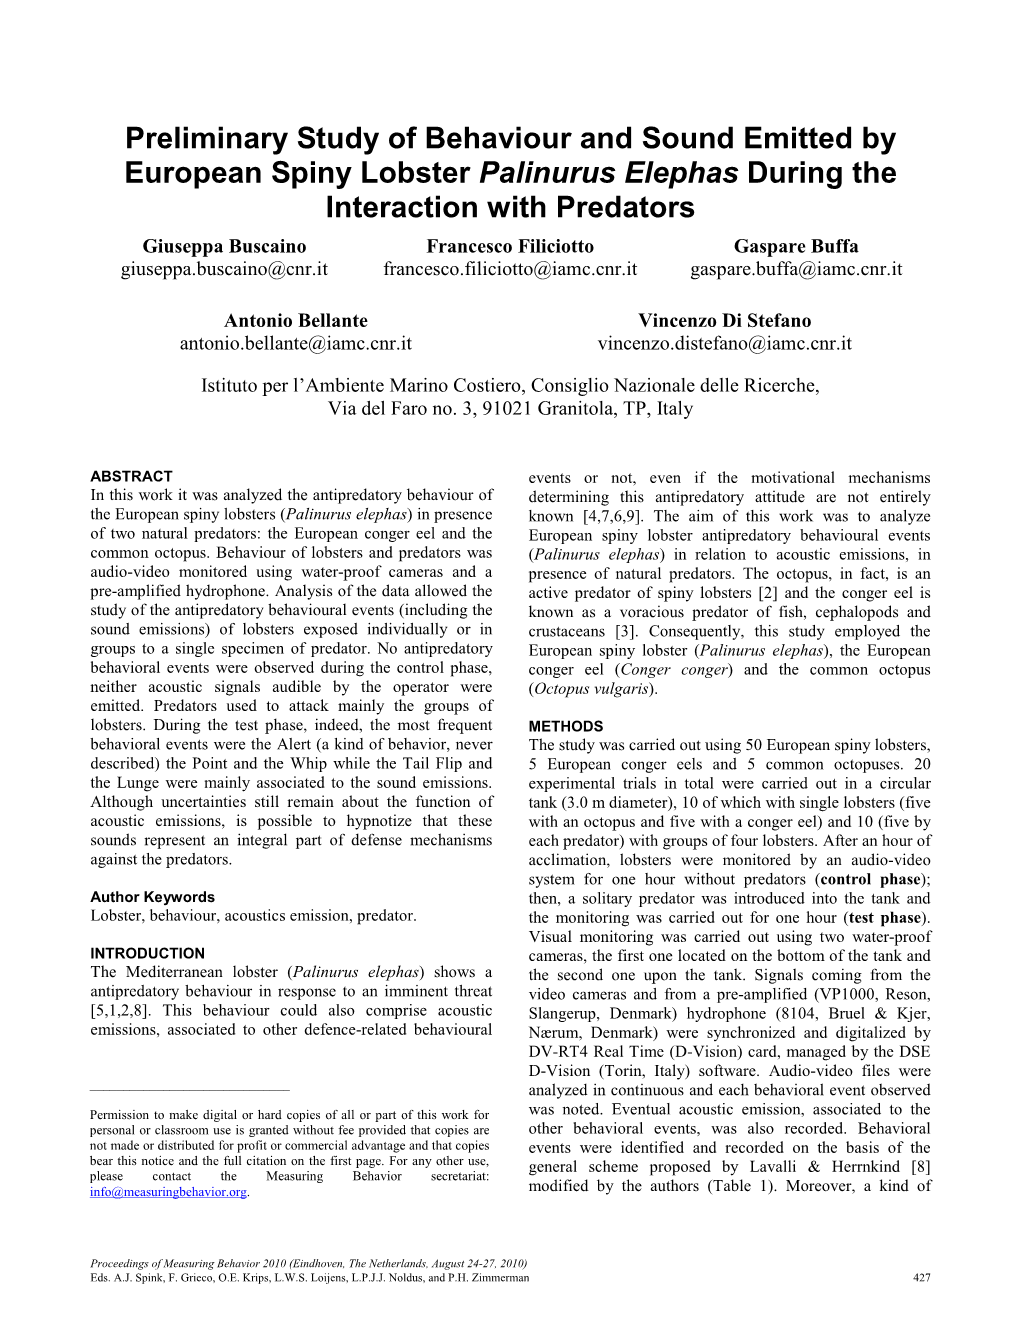 Preliminary Study of Behaviour and Sound Emitted by European Spiny Lobster Palinurus Elephas During the Interaction